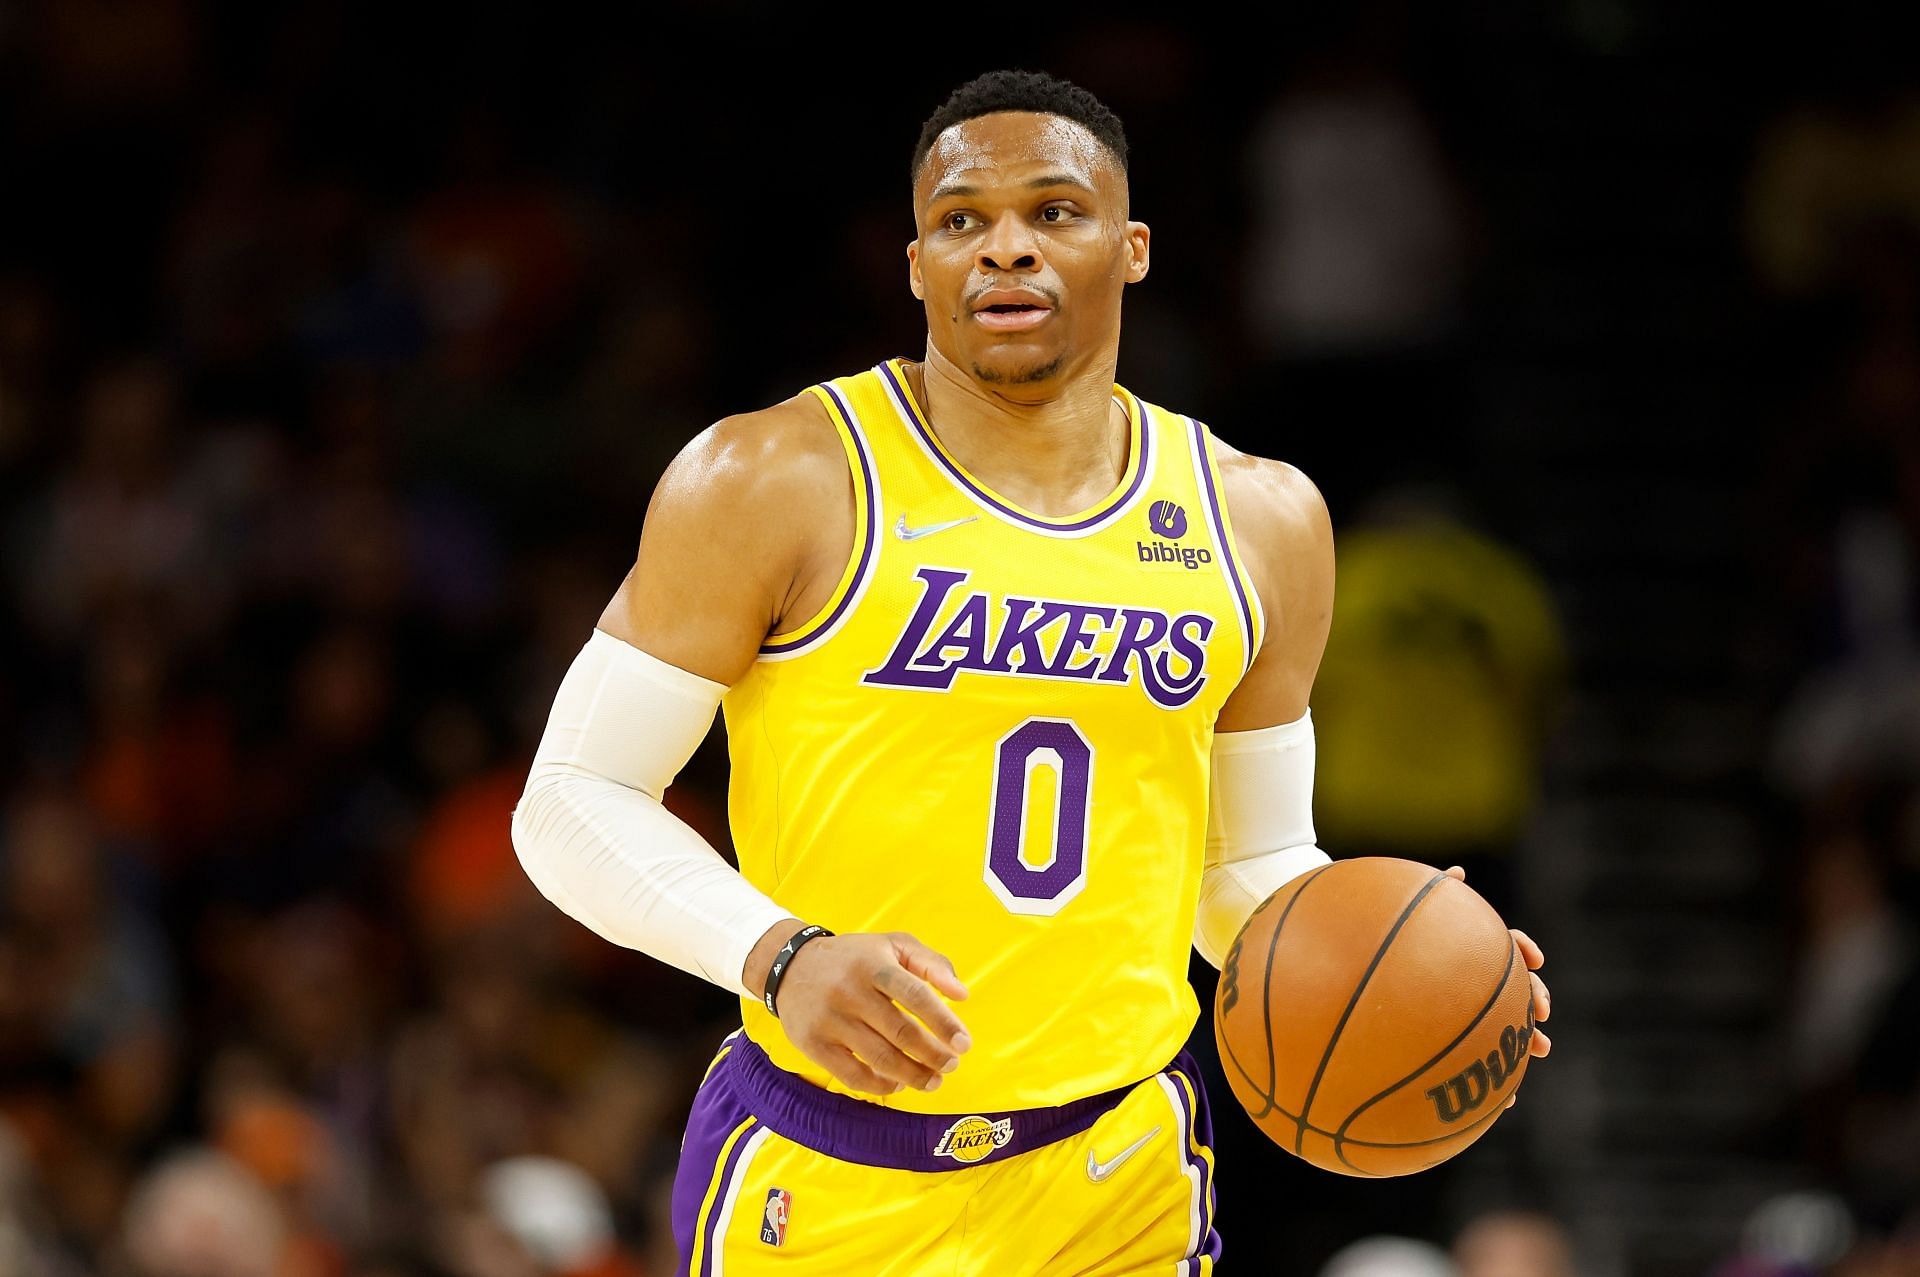 Russell Westbrook of the LA Lakers handles the ball during an NBA game on April 5 in Phoenix, Arizona.